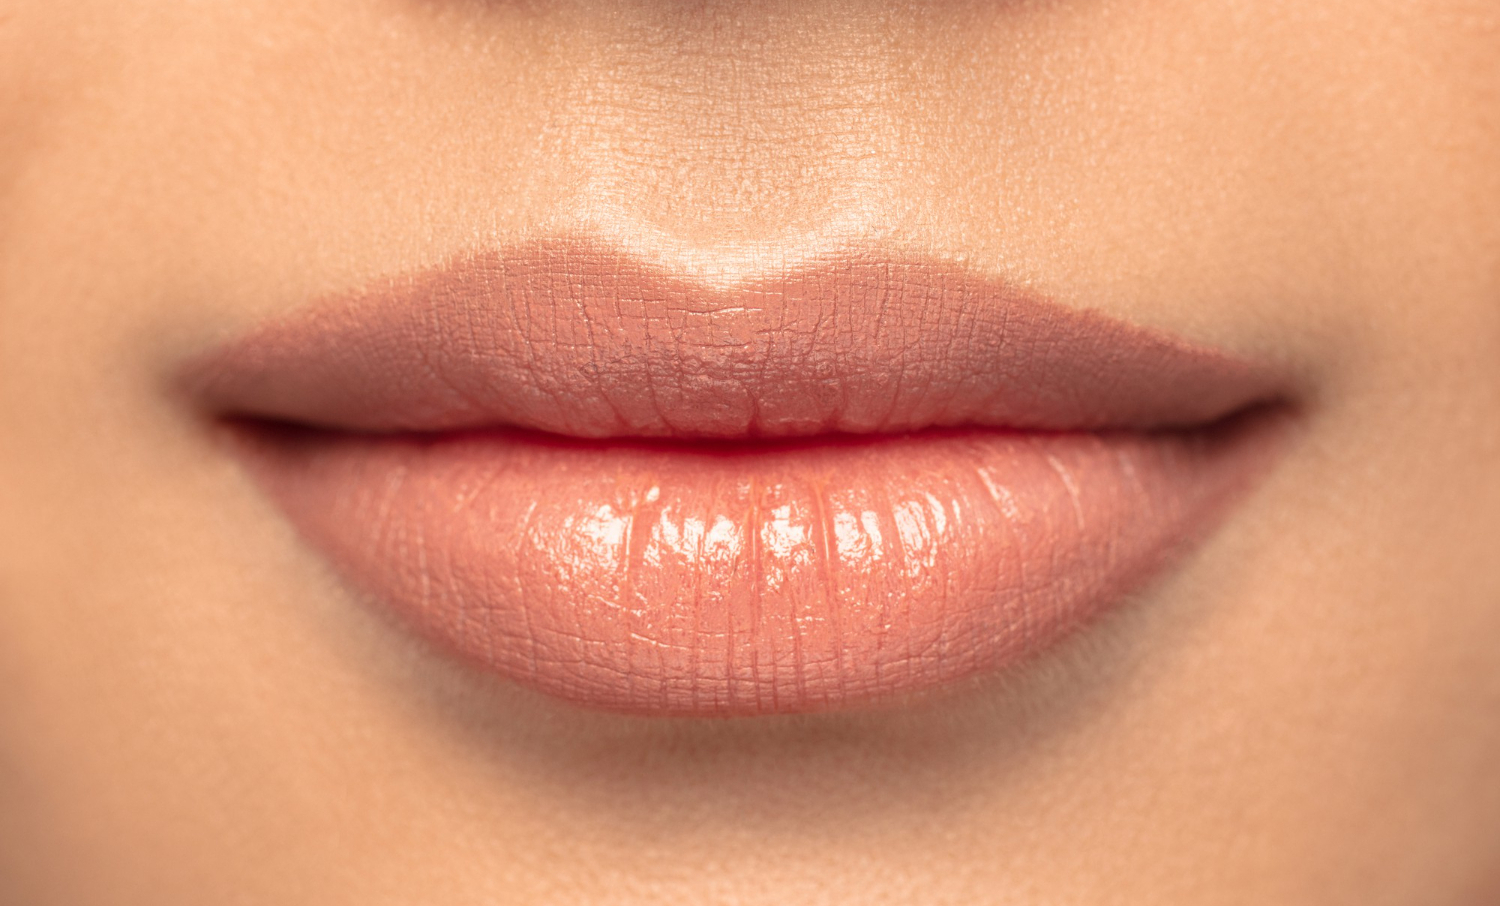 Woman with fuller lips after Lip Fillers in NYC treatment